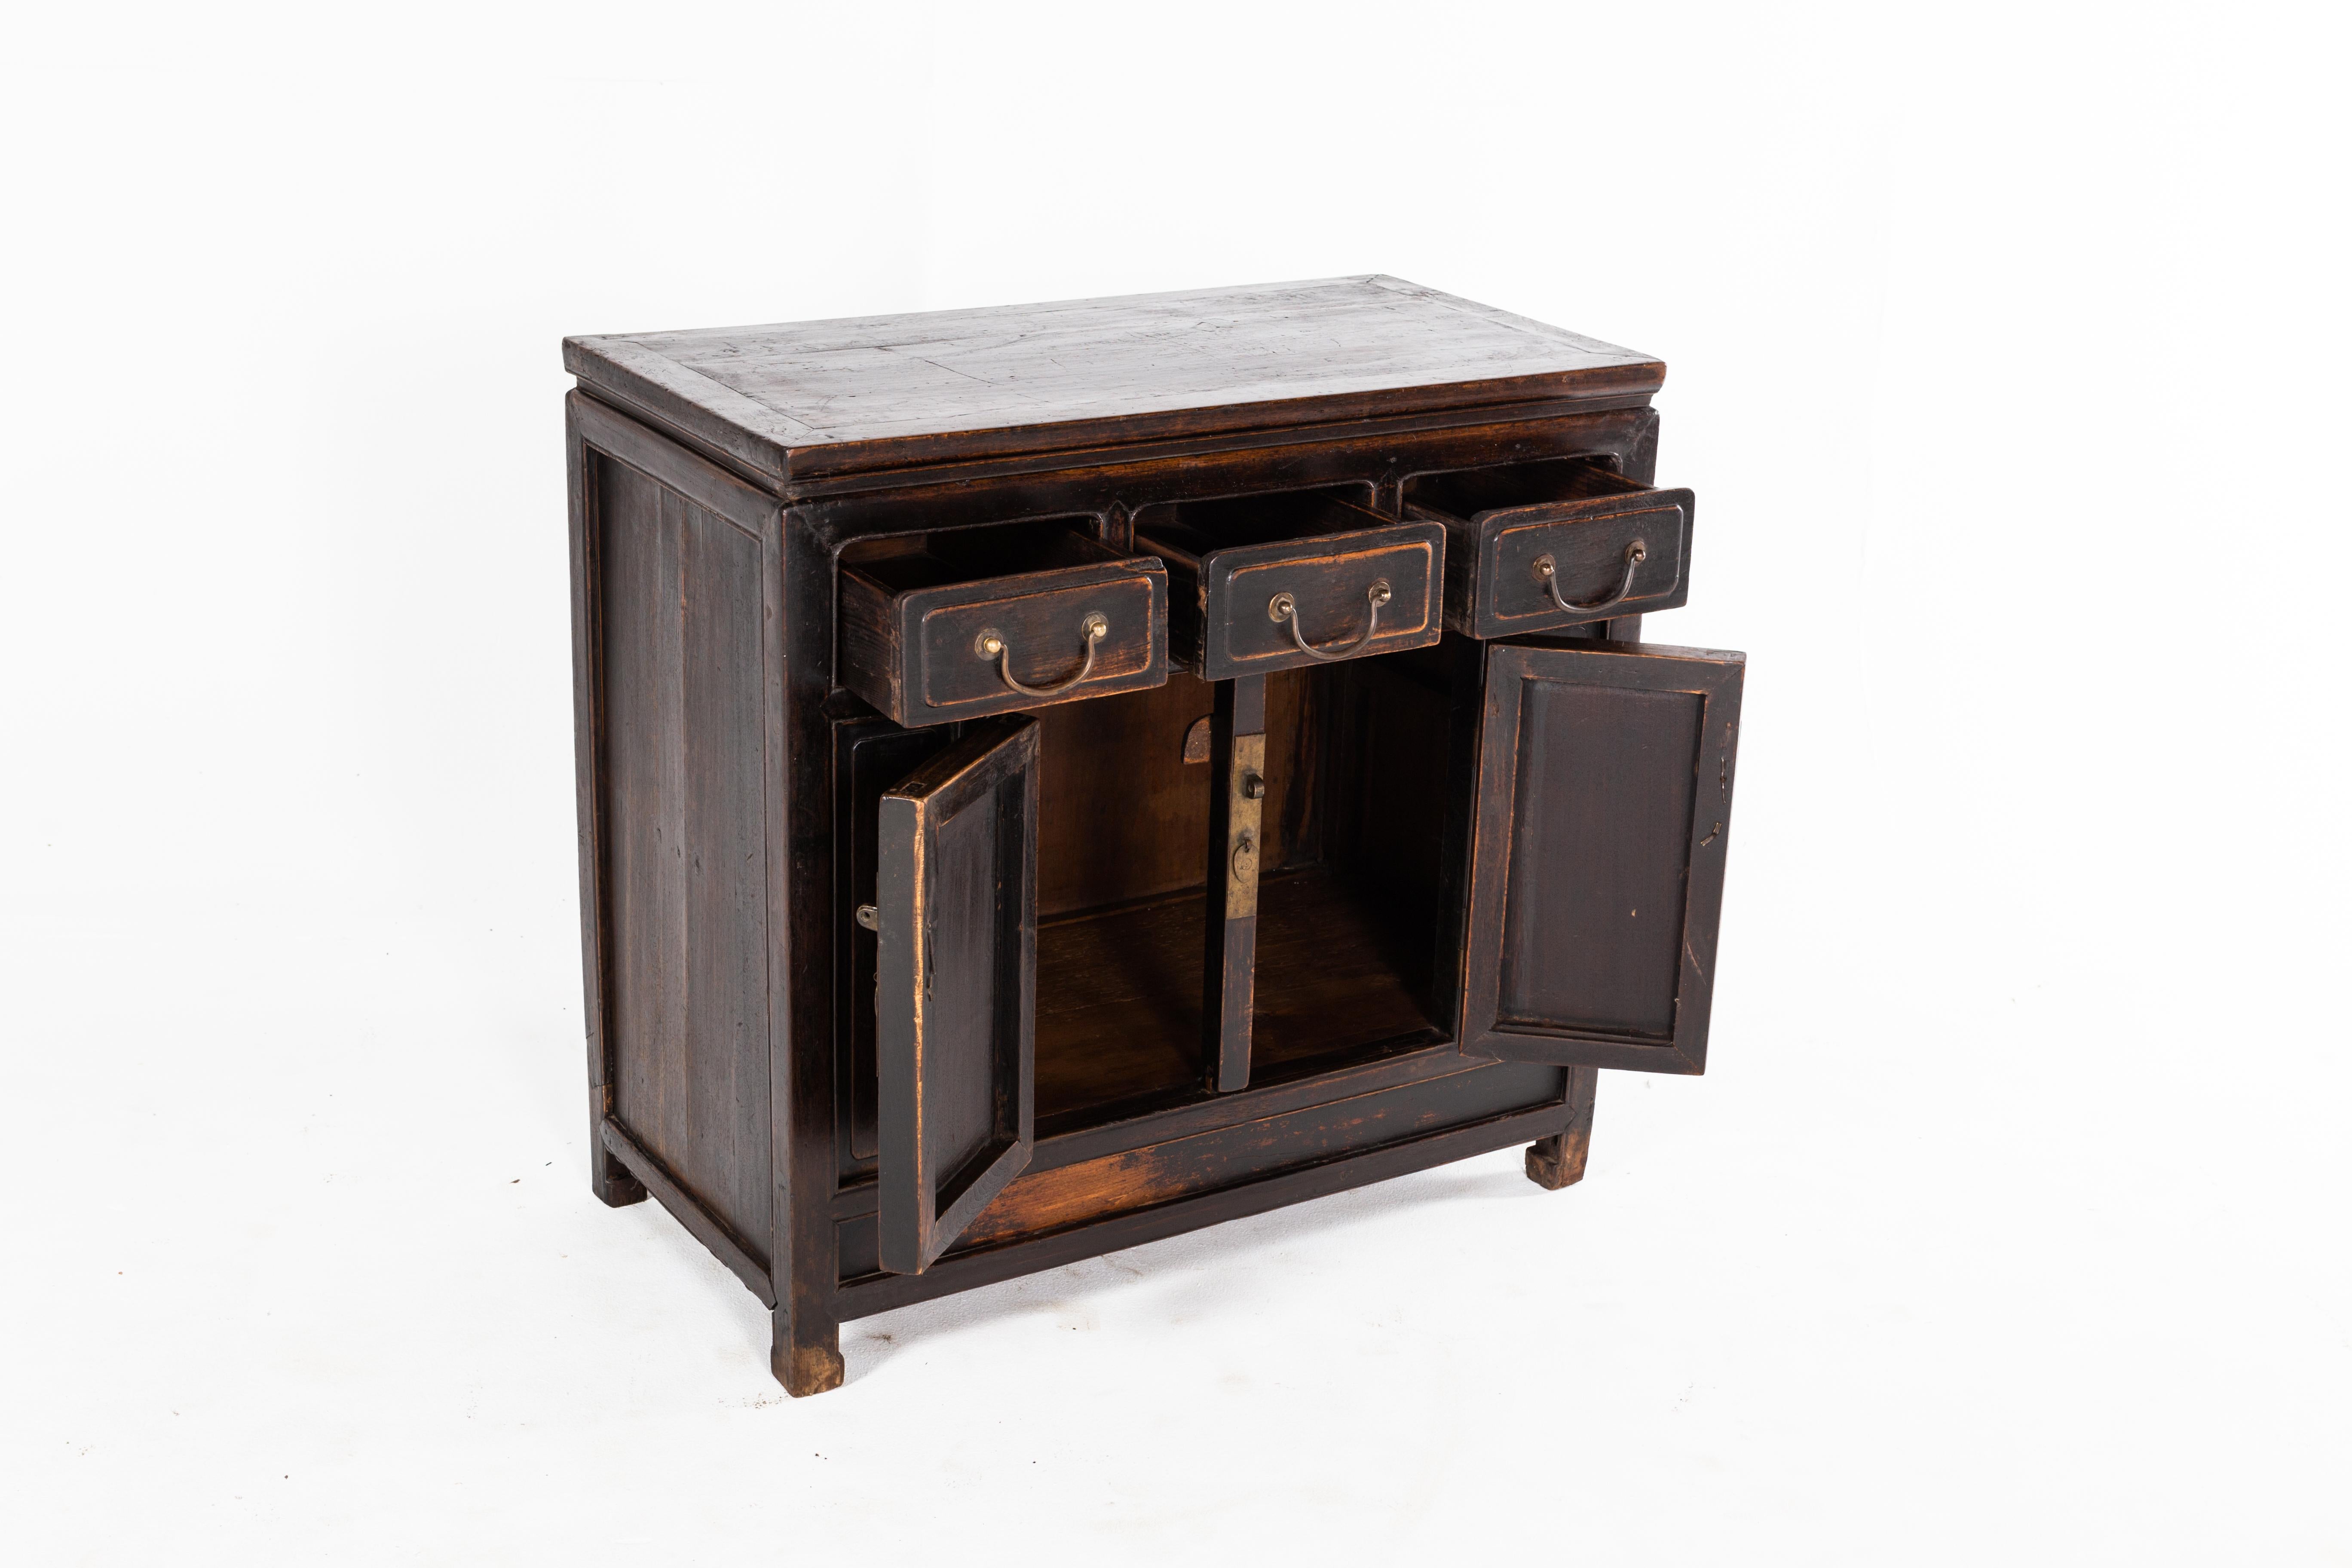 Chinese Qing Dynasty Cabinet with Three Drawers and a Pair of Doors